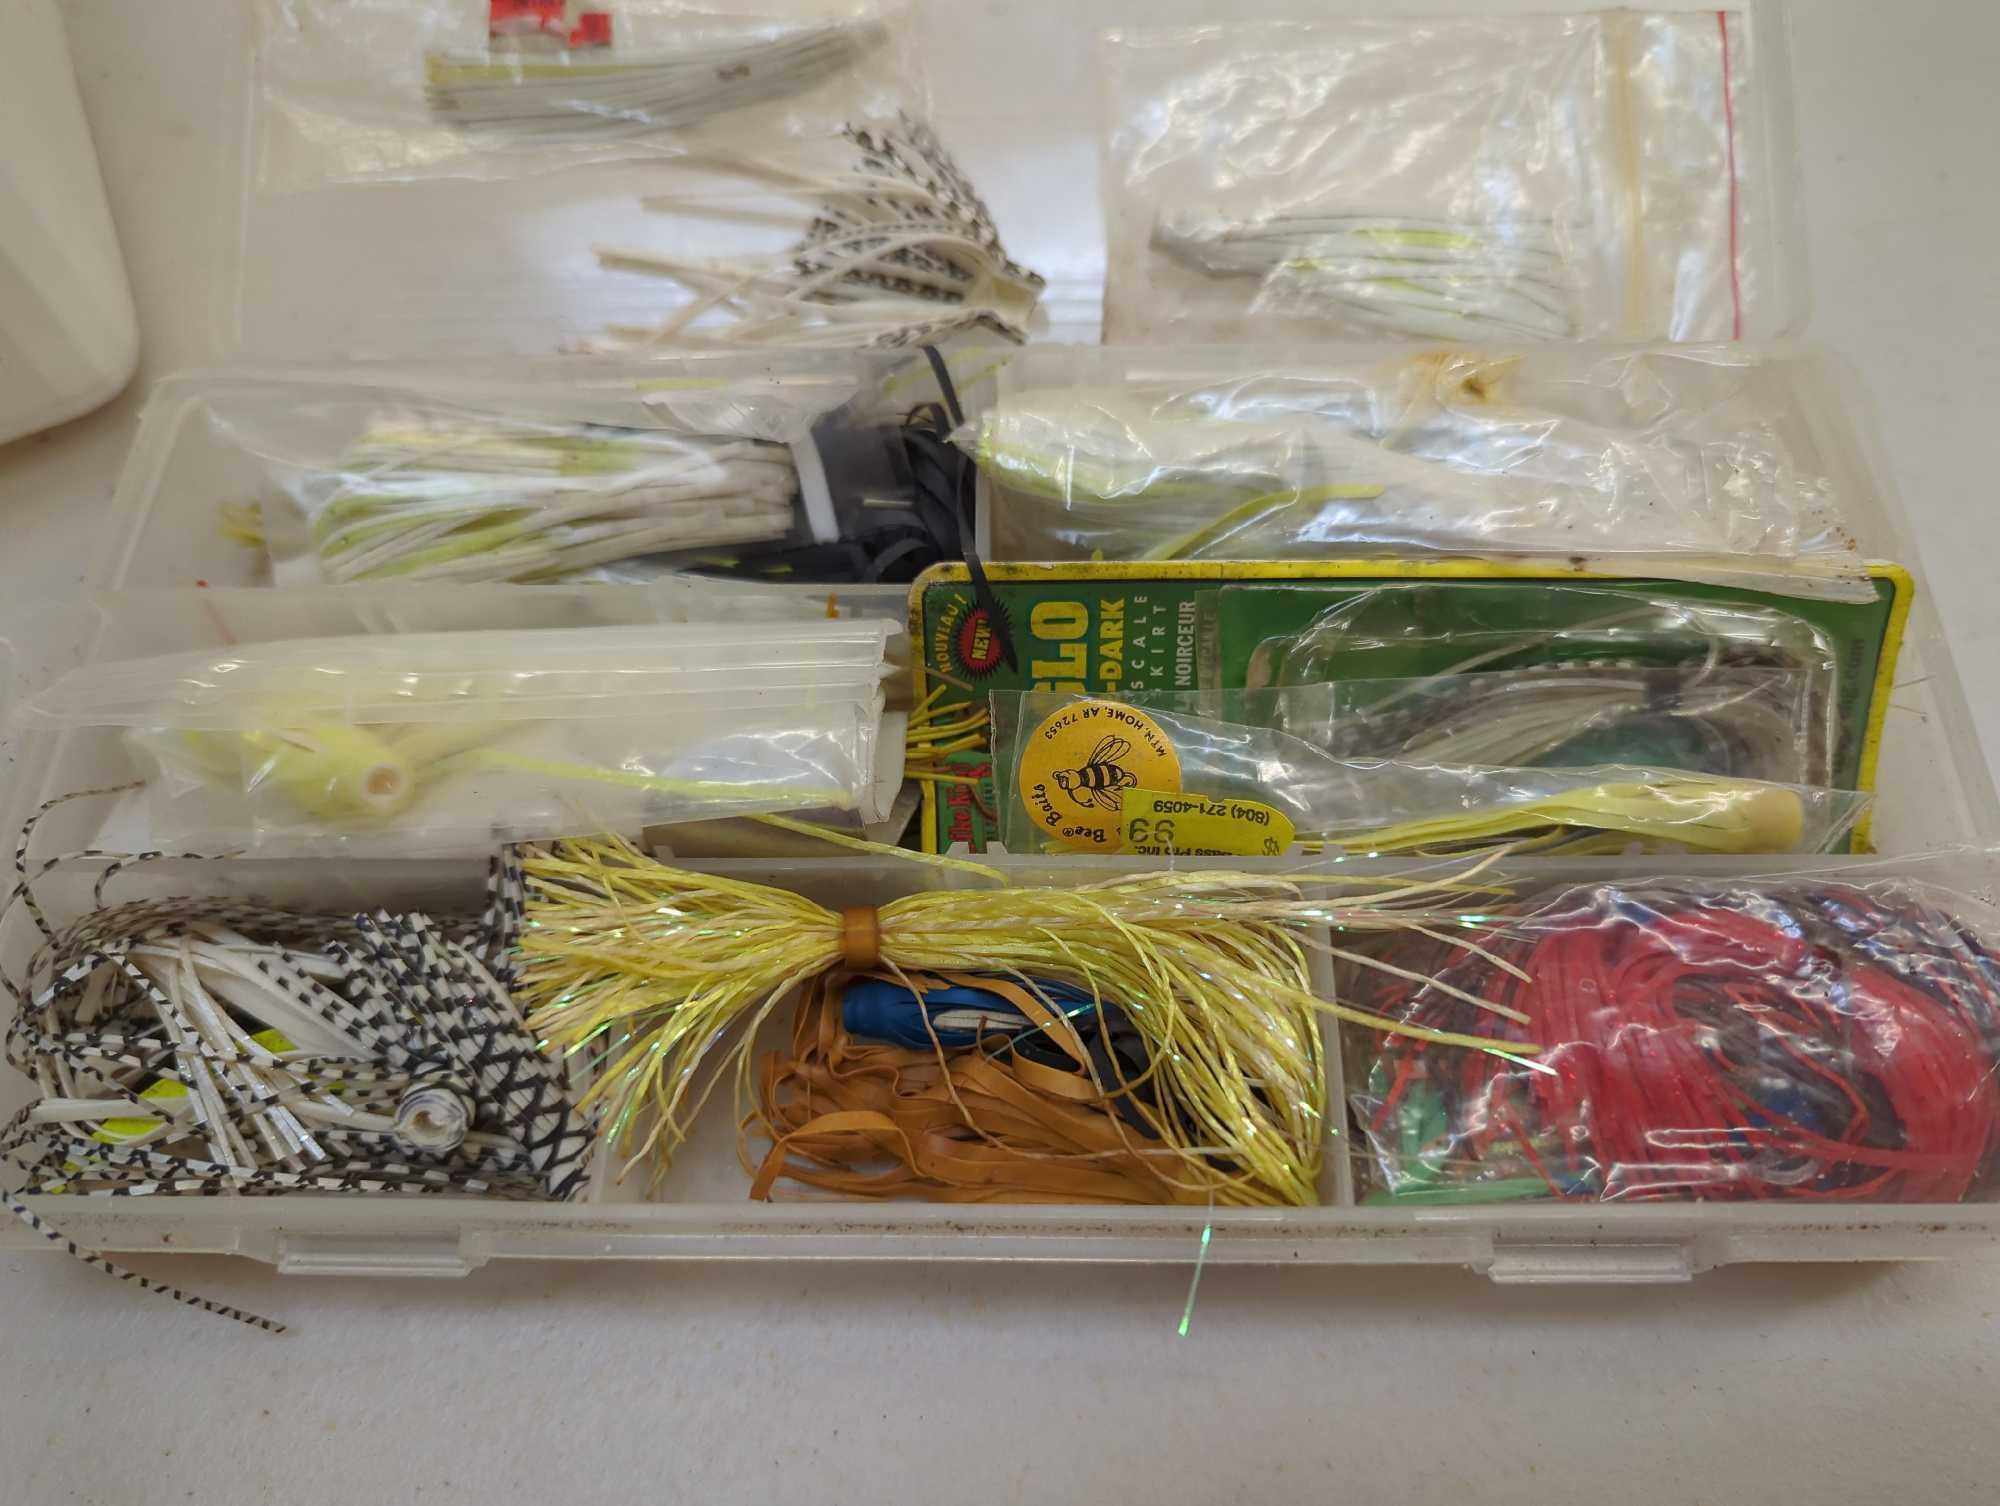 Mini tackle box and small white bin consisting of various fishing lures and other fishing